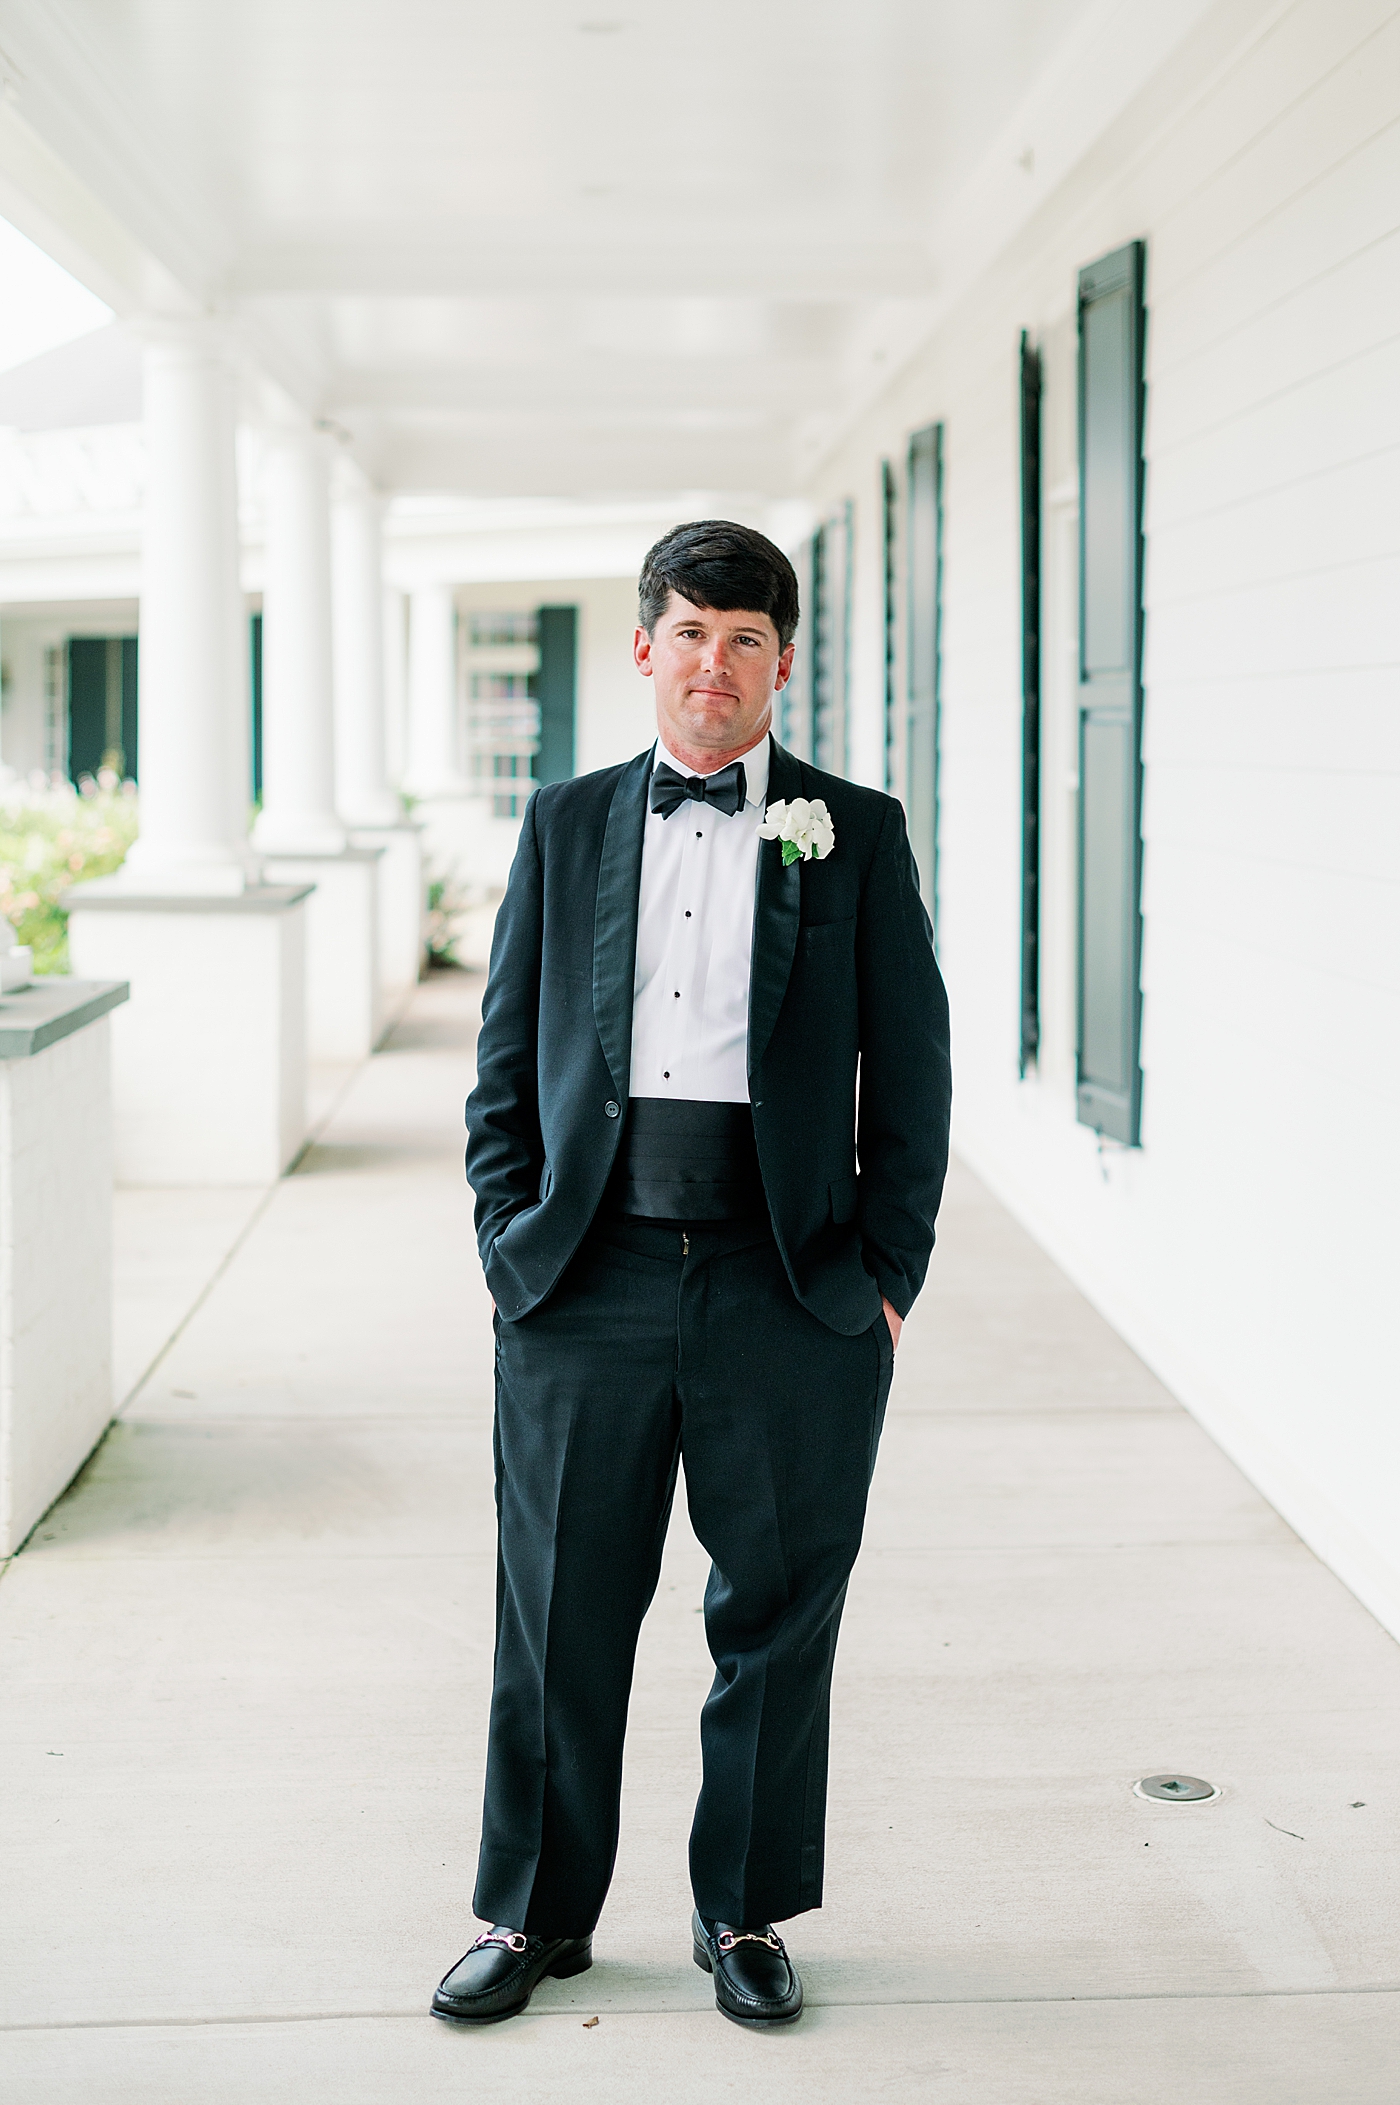 Groom in a tux posing for the camera | Image by Annie Laura Photo